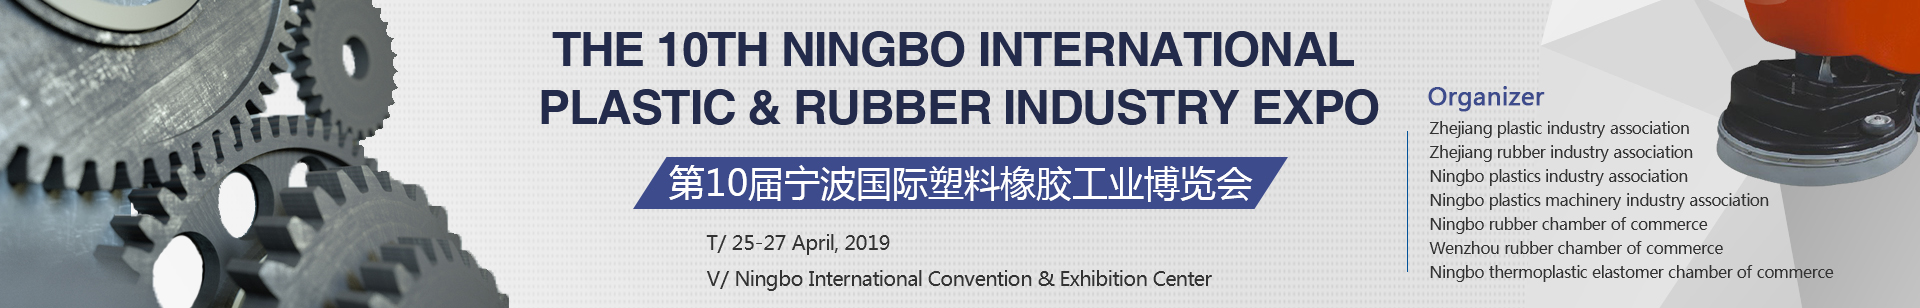 THE 10TH NINGBO INTERNATIONAL PLASTIC & RUBBER INDUSTRY EXPO